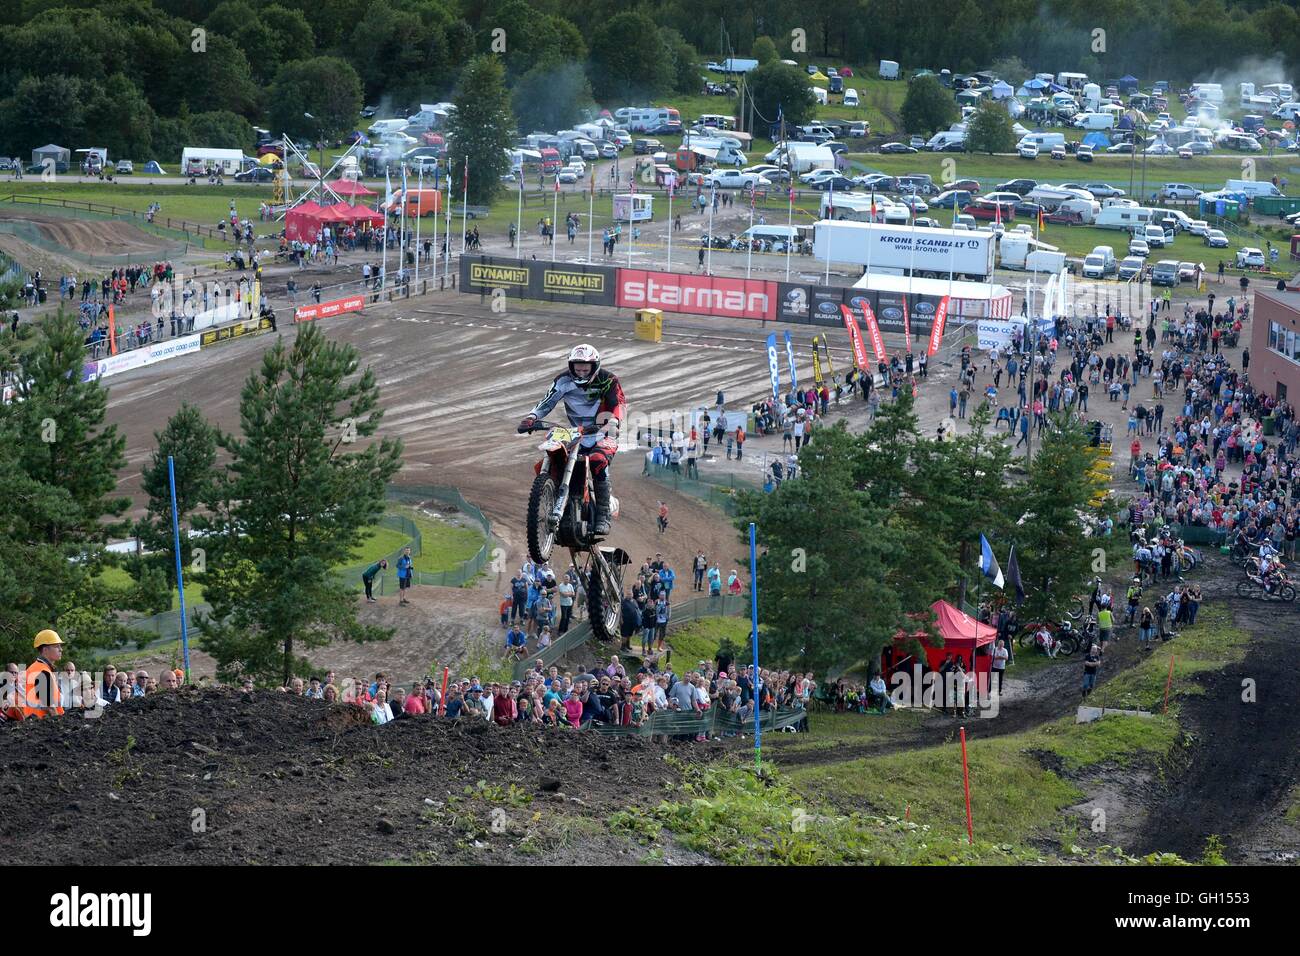 Kivioli. 6th Aug, 2016. Professional motorcyclist competes in an international extreme hill climbing competiton on supercharged motorcycles at Kivioli Ski Resort in Northeastern Estonia on August 6, 2016. © Sergei Stepanov/Xinhua/Alamy Live News Stock Photo